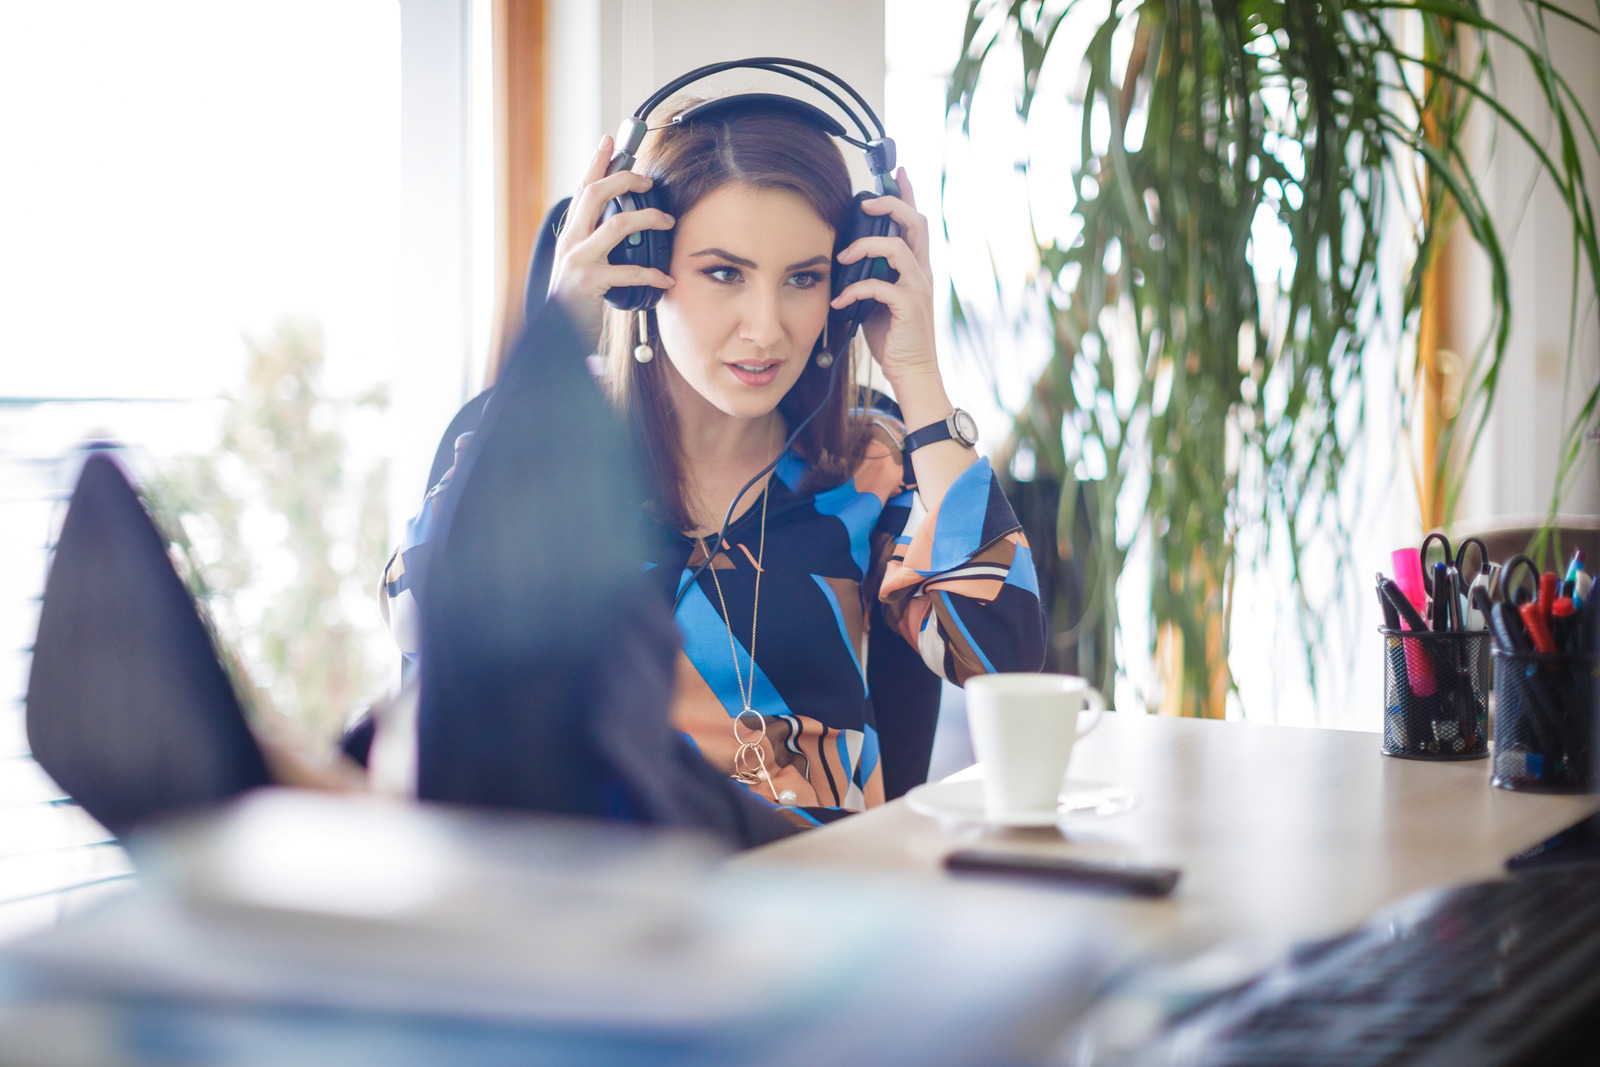 Smiling businesswoman on a break with feet up at her desk adjusting headphones